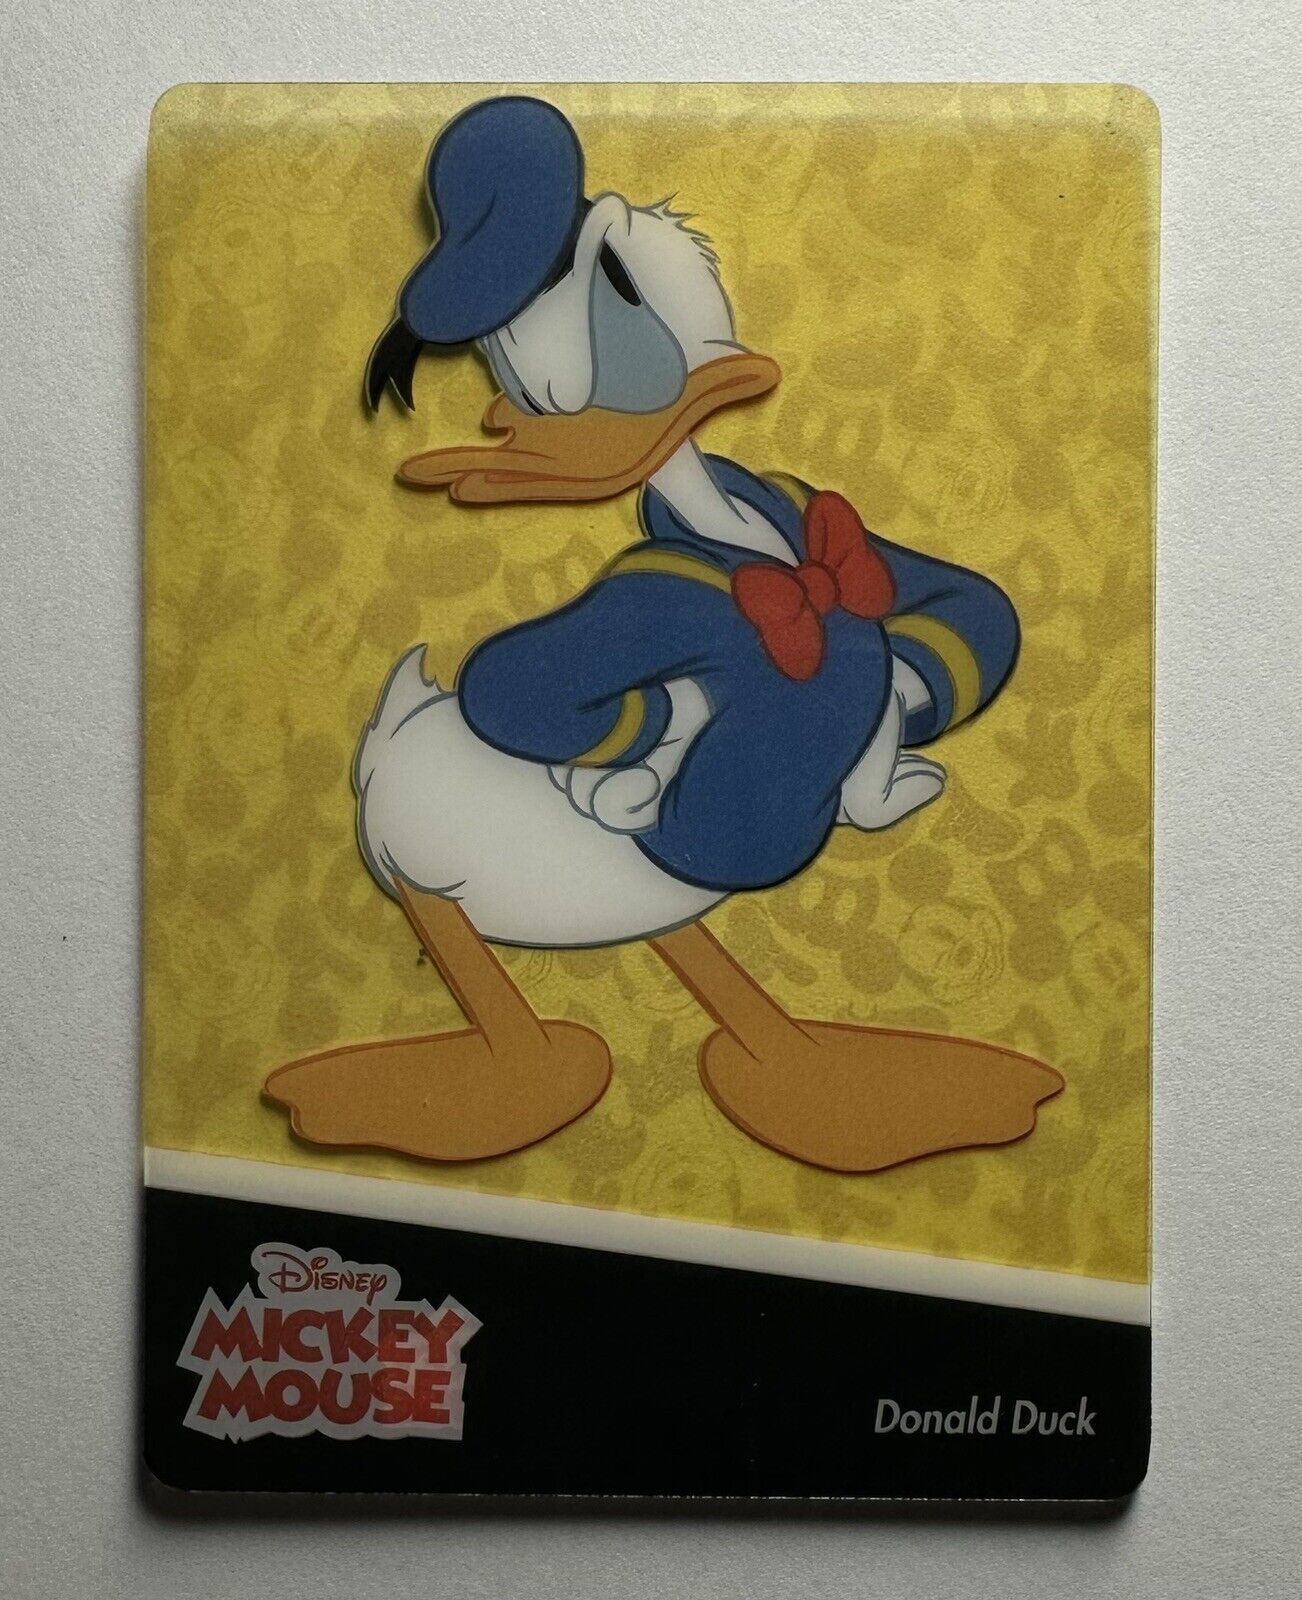 2019 Upper Deck Disney's Mickey Mouse Acetate DONALD DUCK #73 card in Toploader